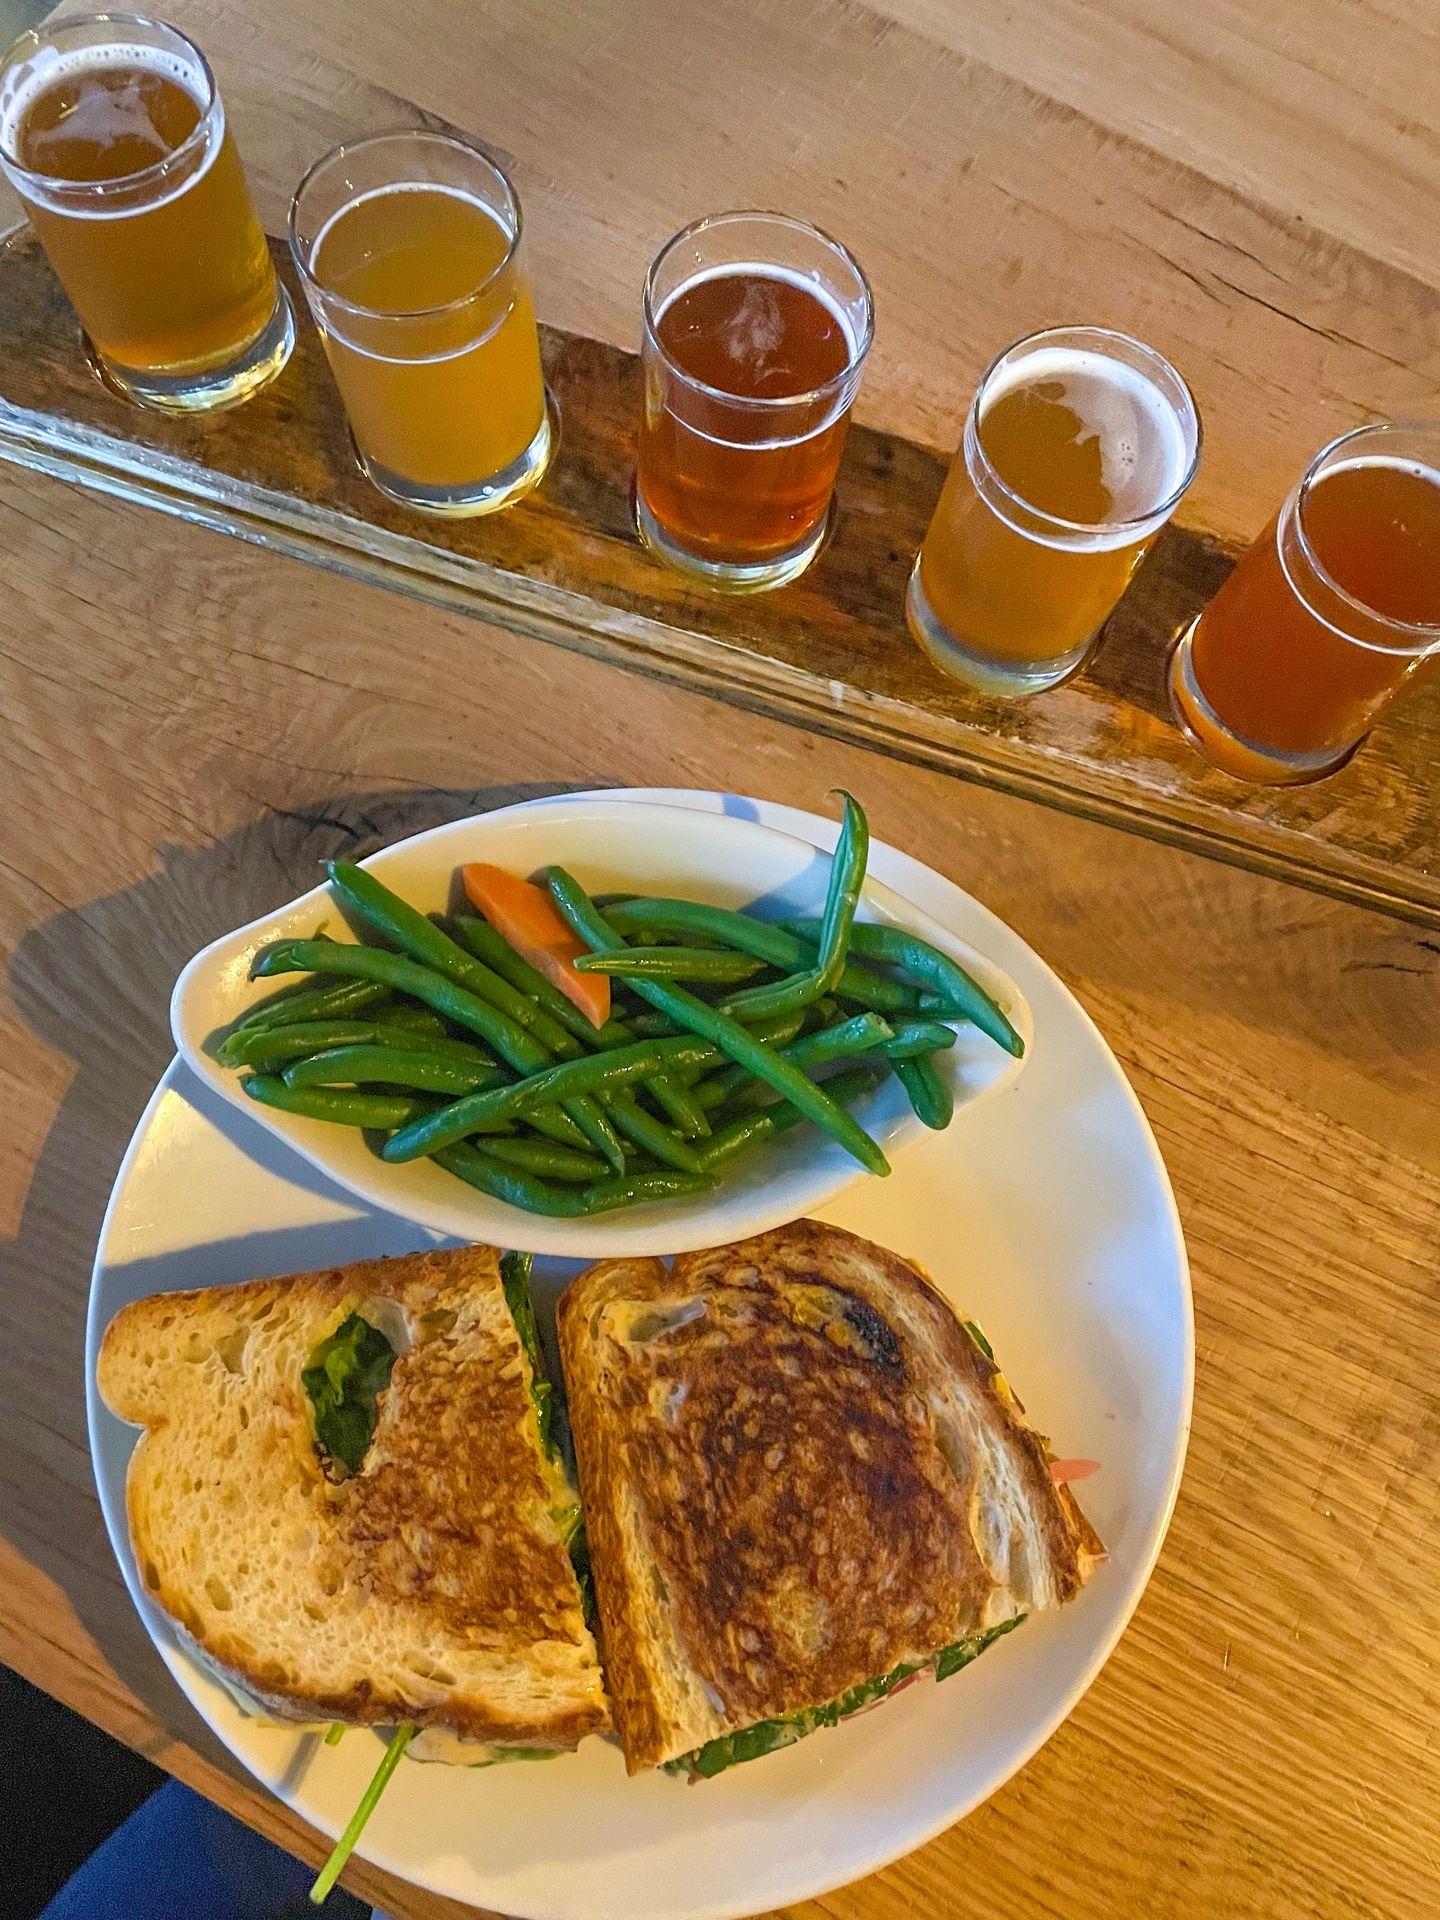 A panini with a side of green beans next to a flight of 5 beers from Vintage Brewing